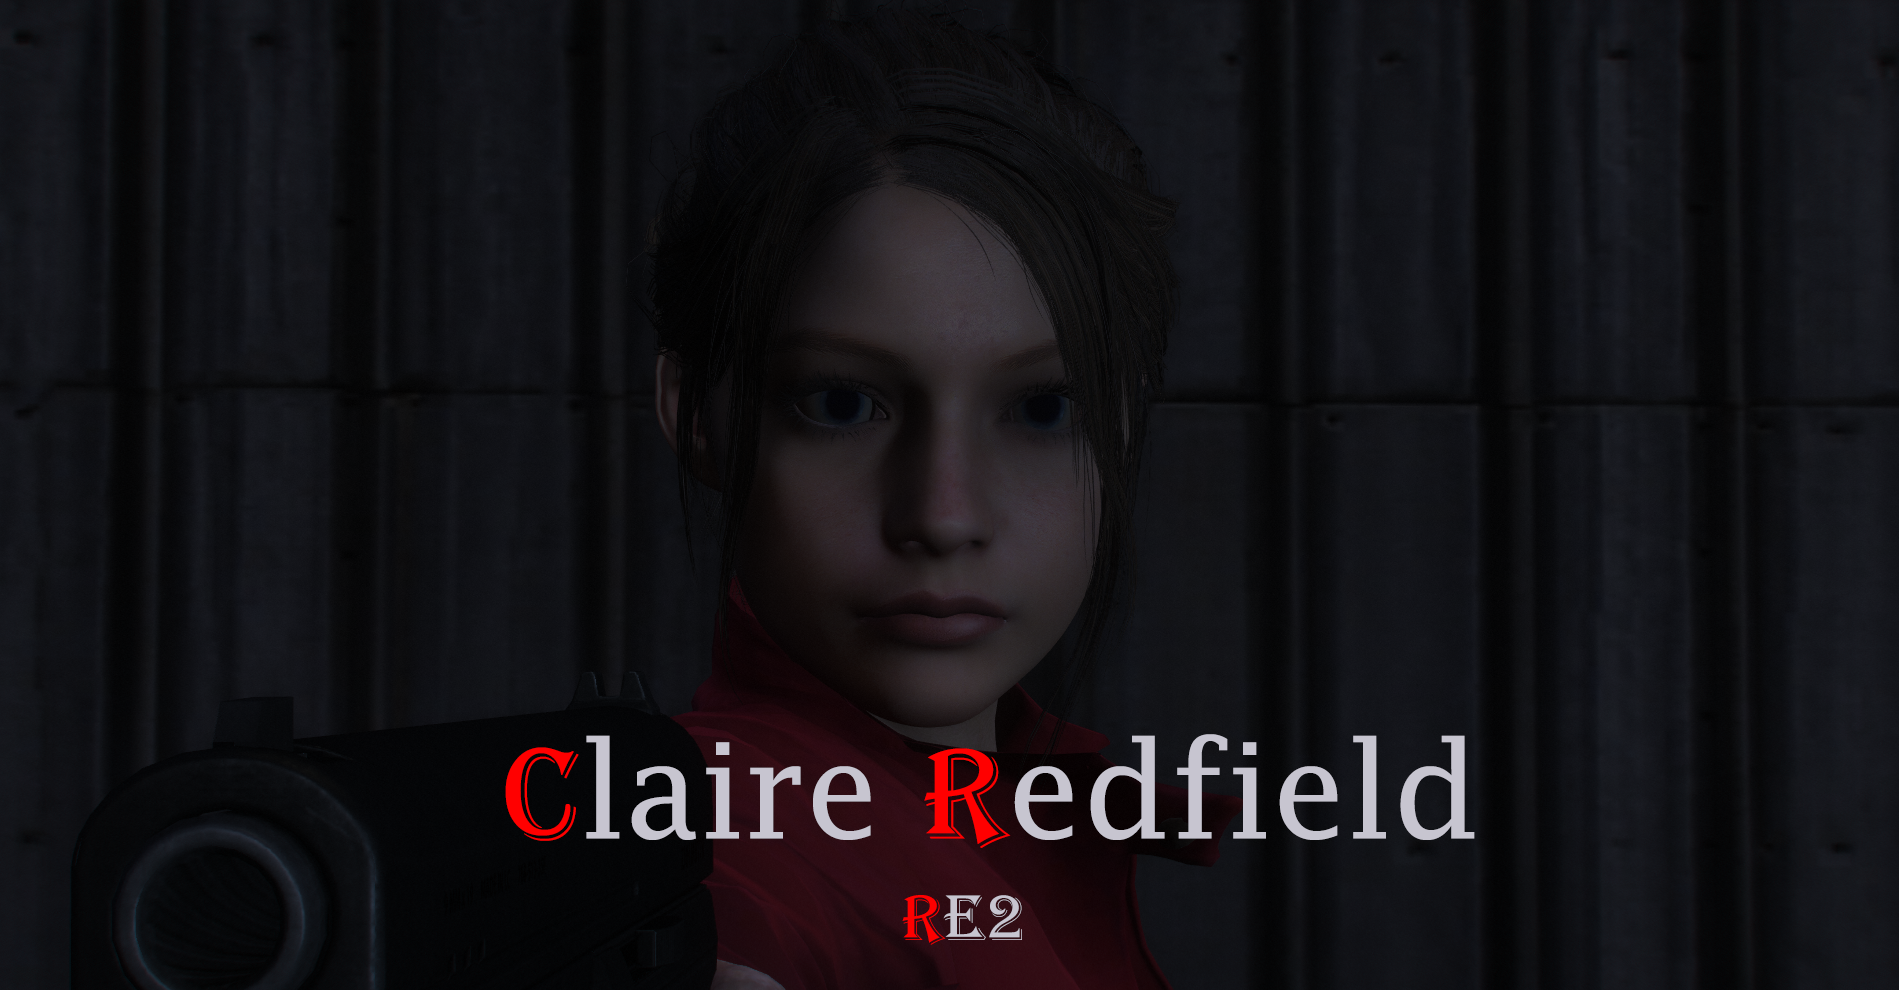 Ada Wong Resident Evil 2 Remake [Add-On Ped